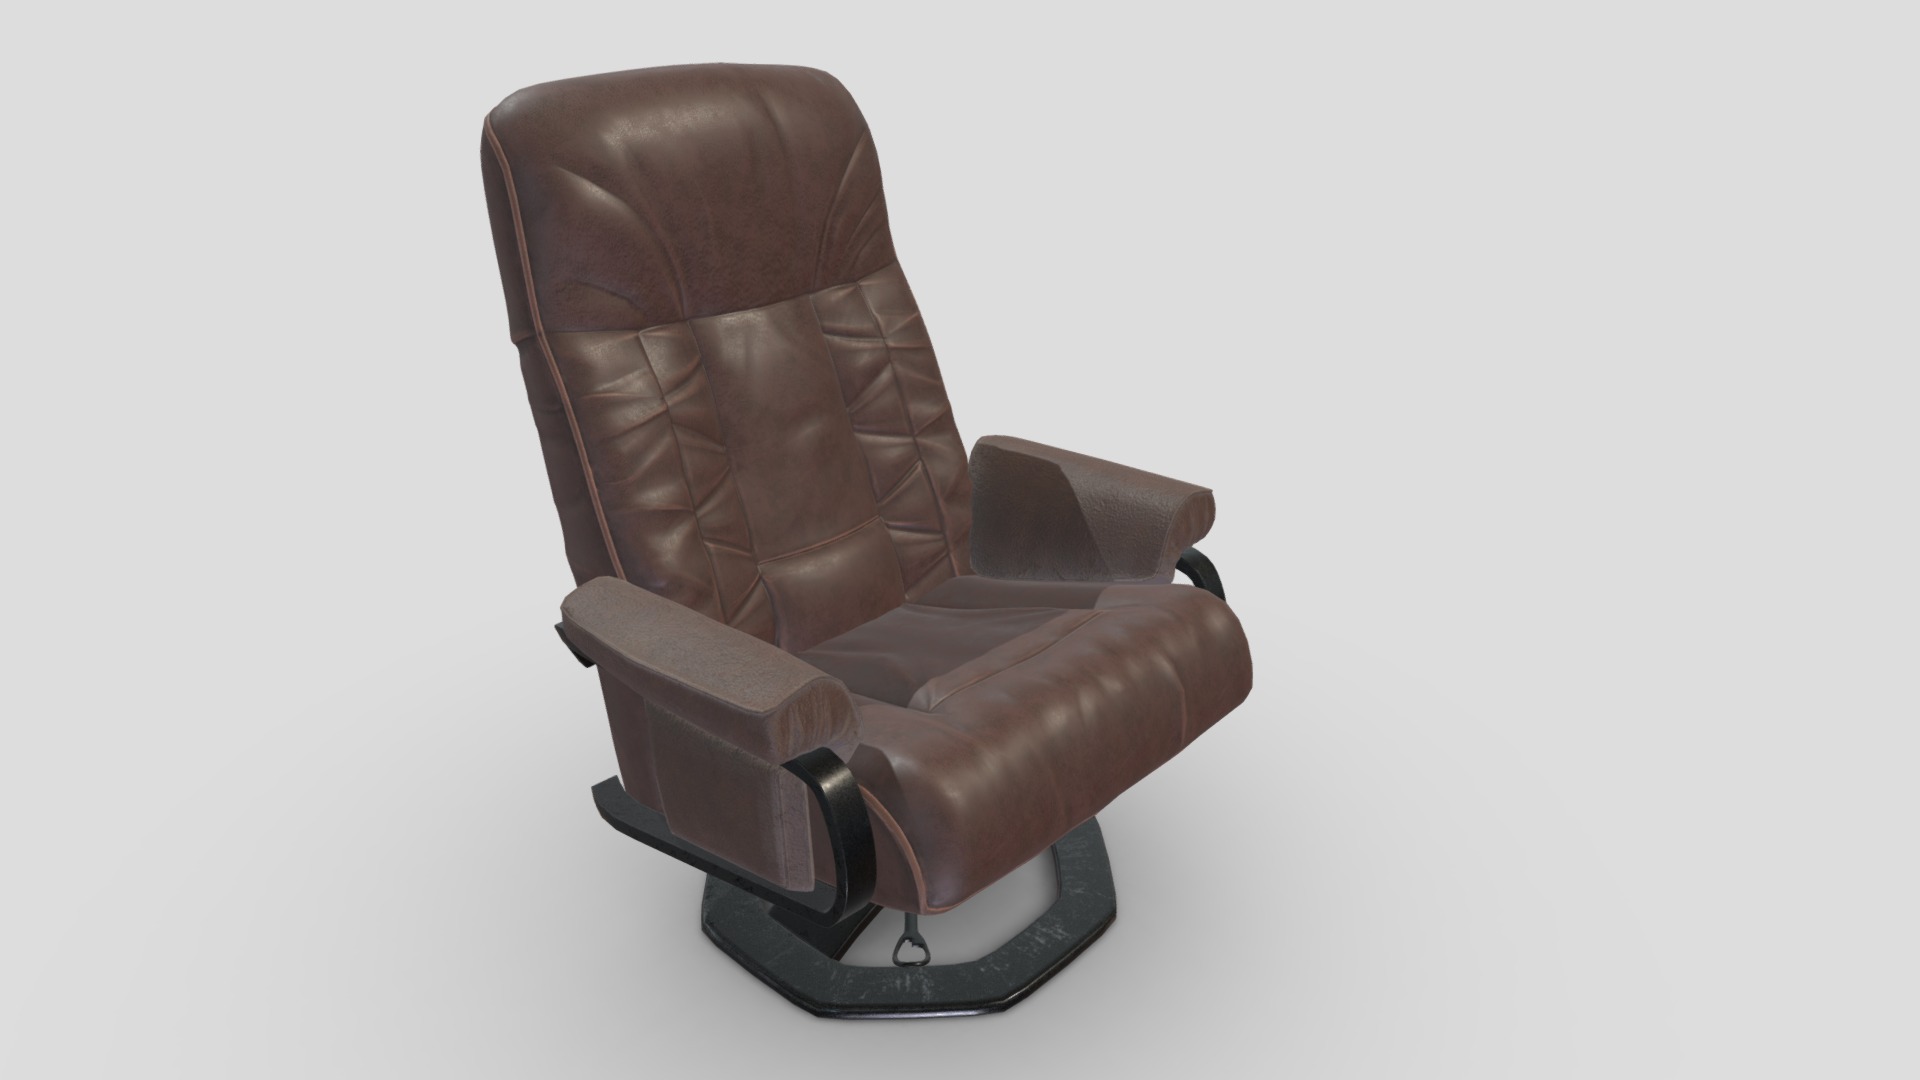 3D model Arm Chair 07 - This is a 3D model of the Arm Chair 07. The 3D model is about a brown leather chair.